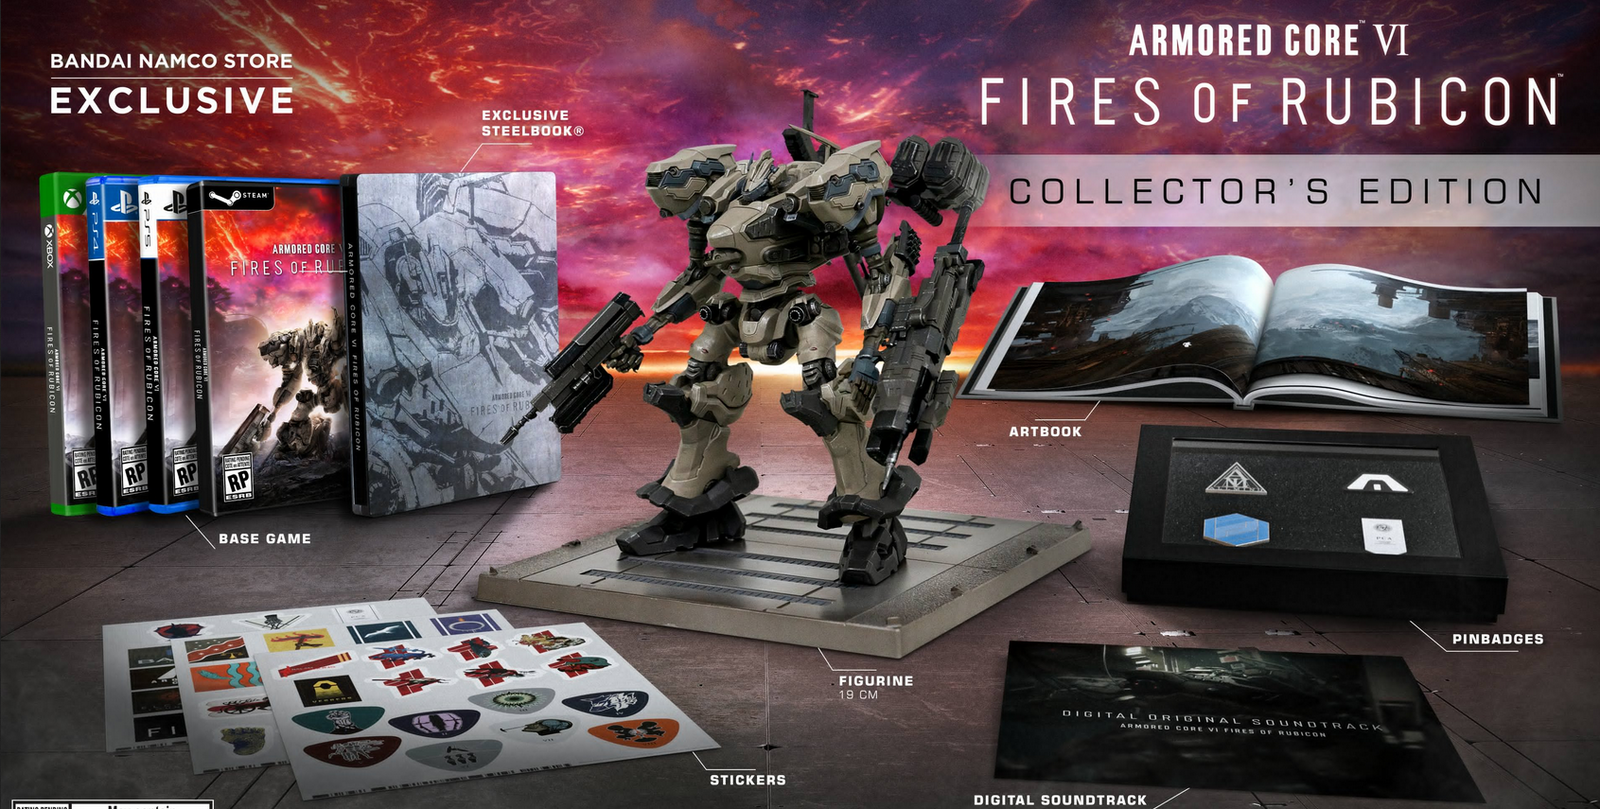 Amored Core 6 Fires of Rubicon Collector's Edition